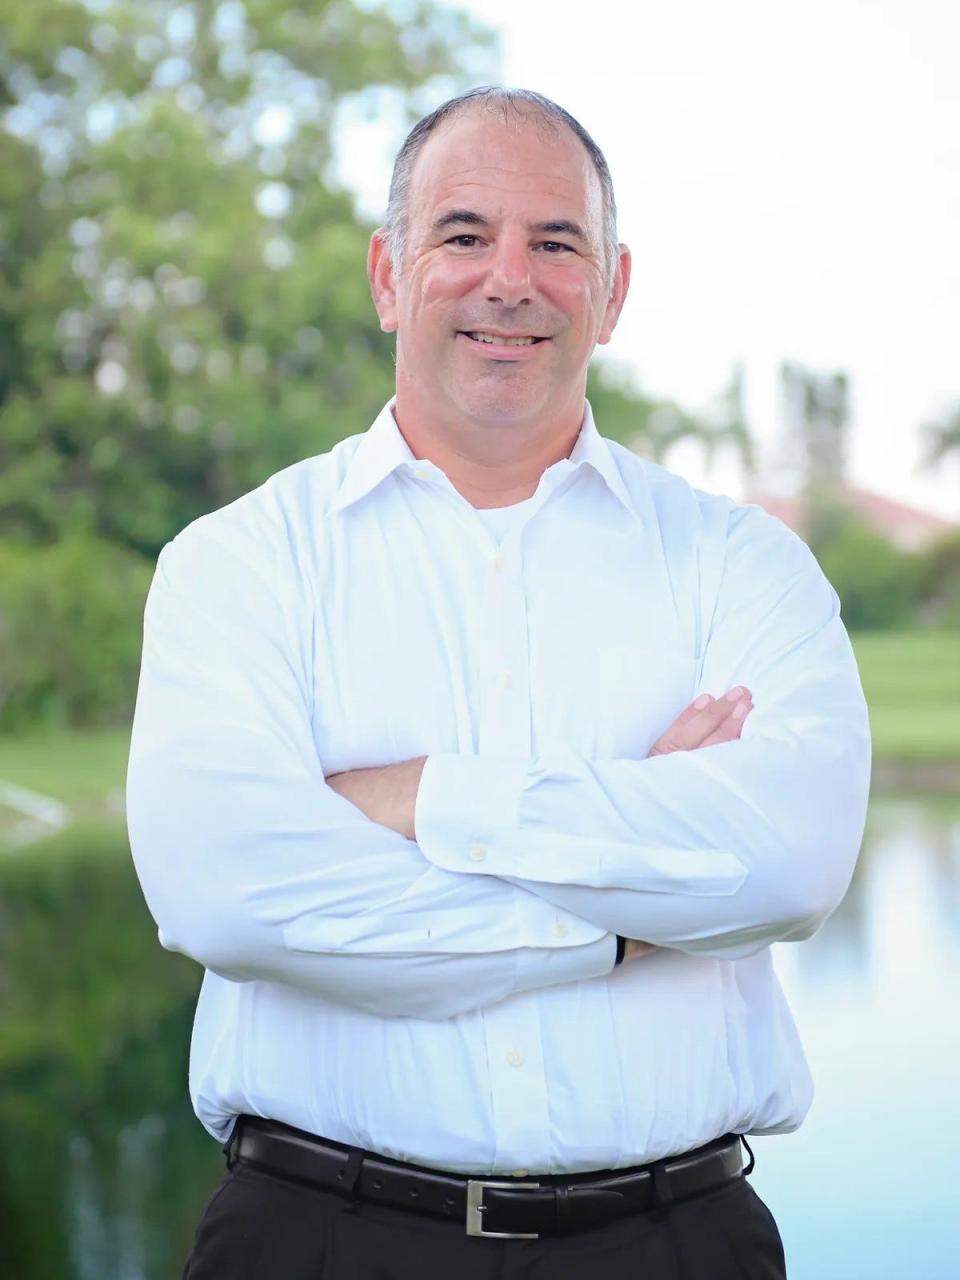 Mike Letsky, 47, is running to represent Boca Raton and surrounding areas on the Palm Beach County School Board in 2024. The primary election is Aug. 20.